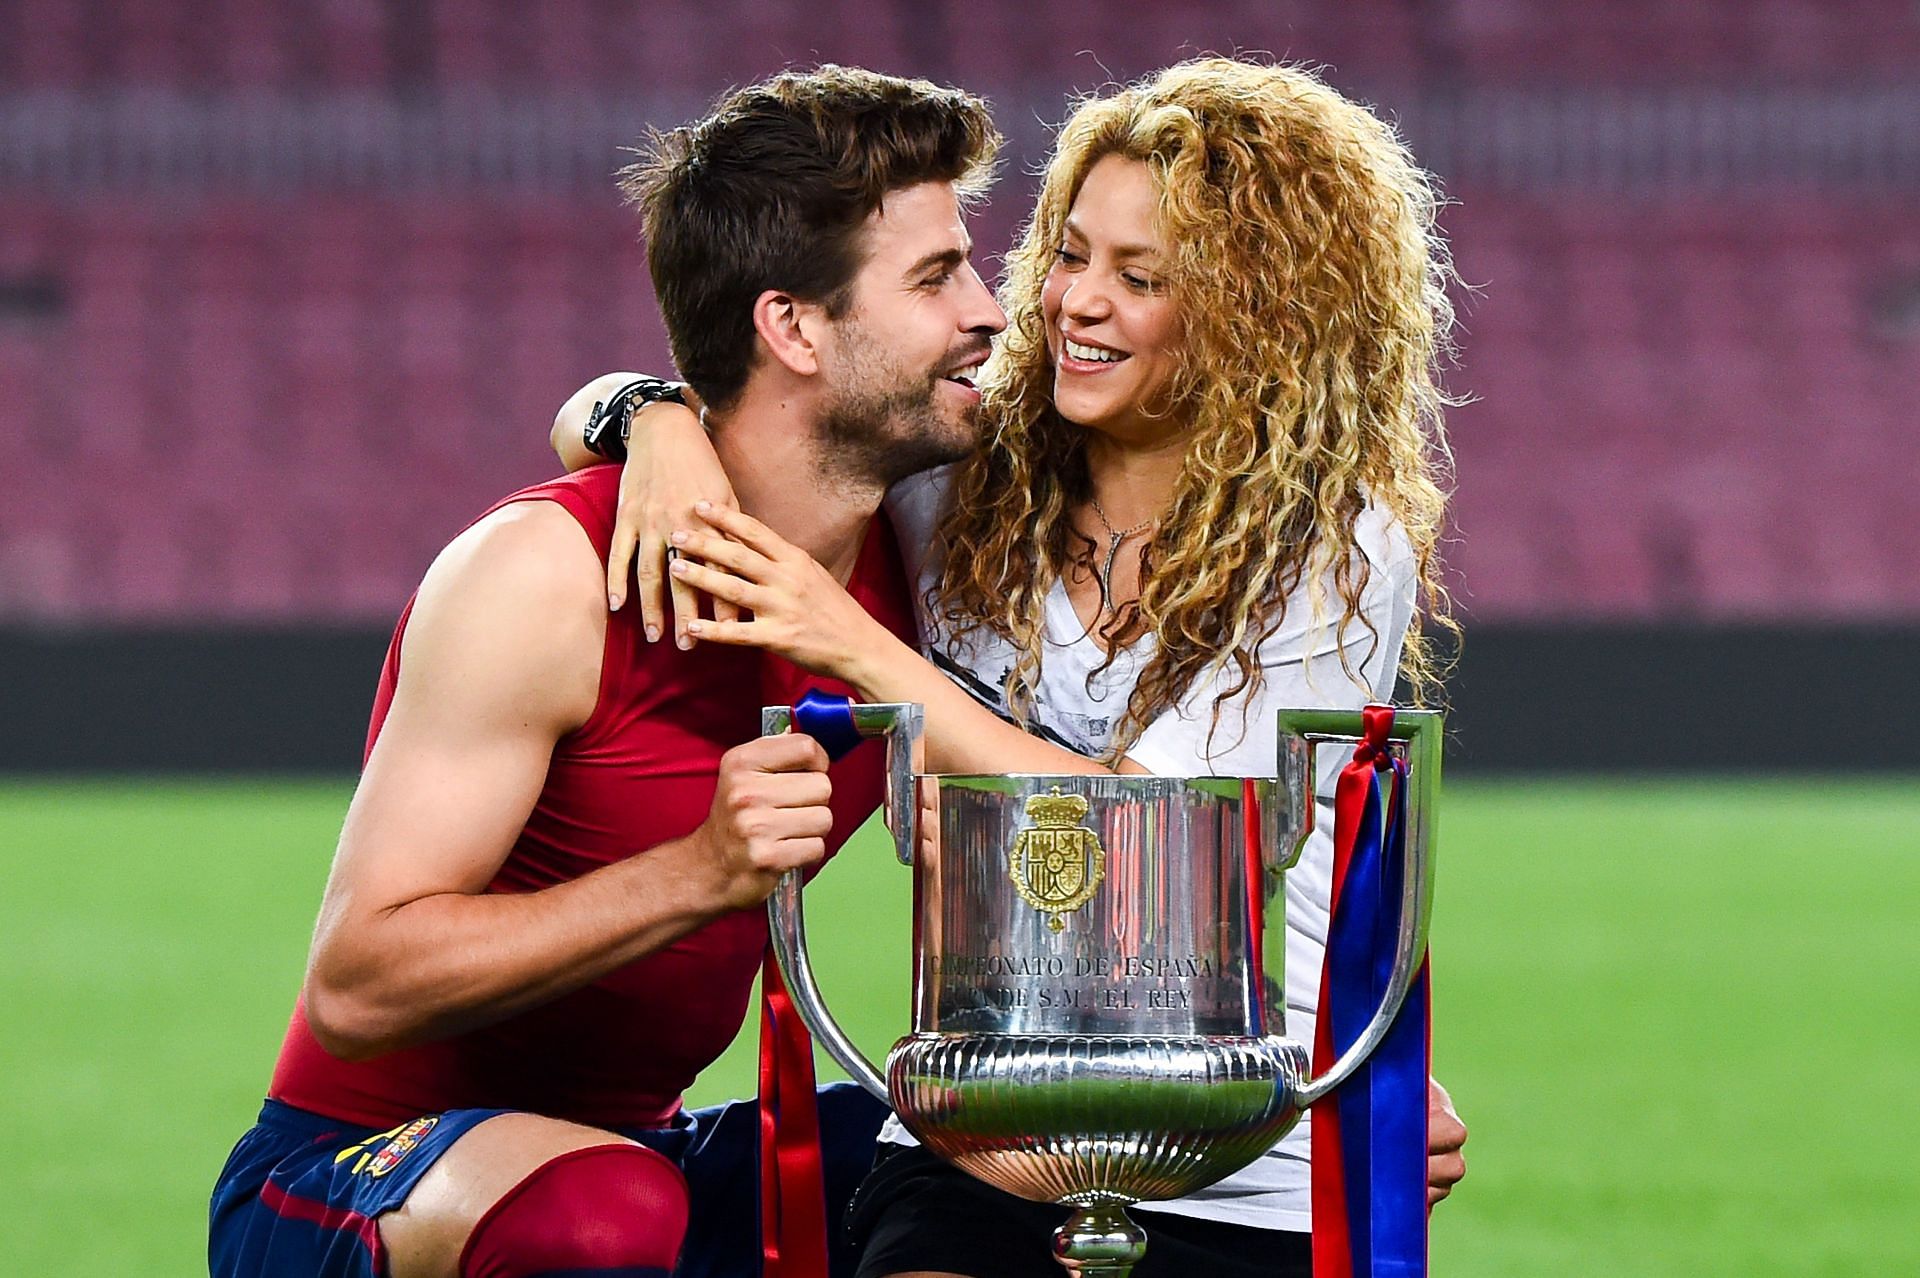 The Barca defender reportedly has been out partying